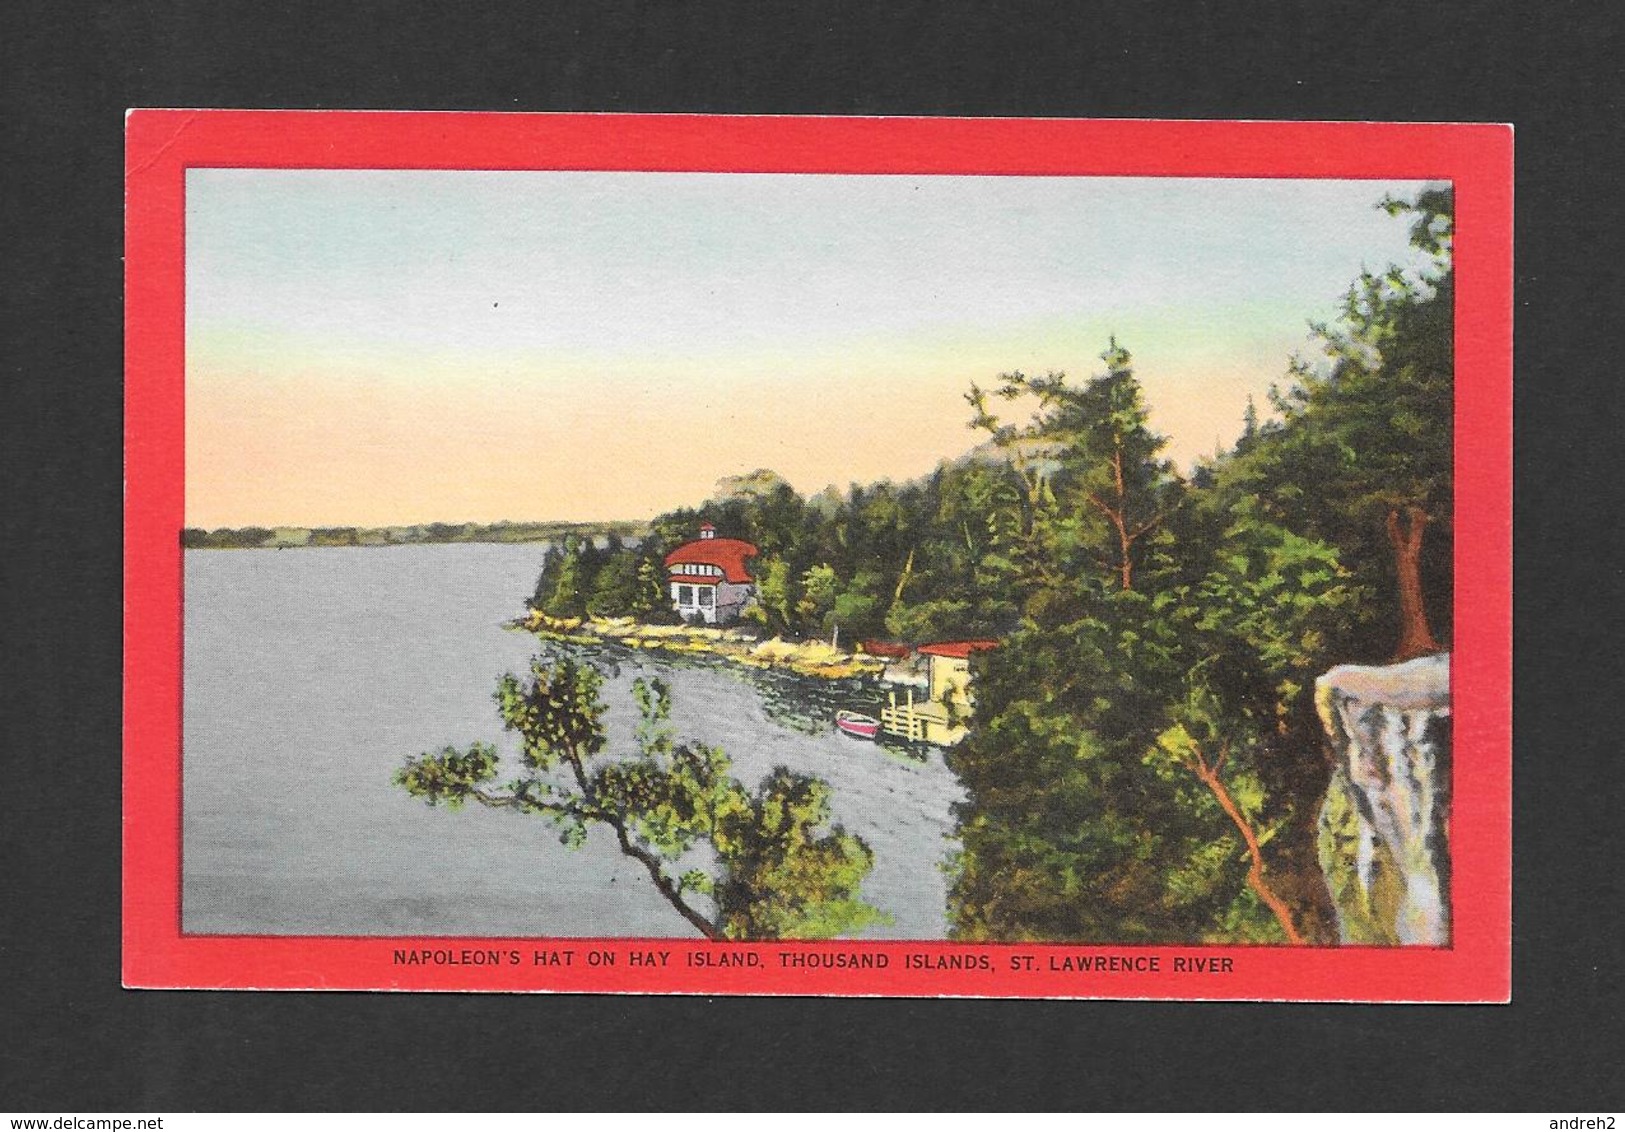 THOUSAND ISLANDS - ONTARIO - NAPOLEON'S HAT ON HAY ISLANDS ST LAWRENCE RIVER - BY VALENTINE BLACK - Thousand Islands